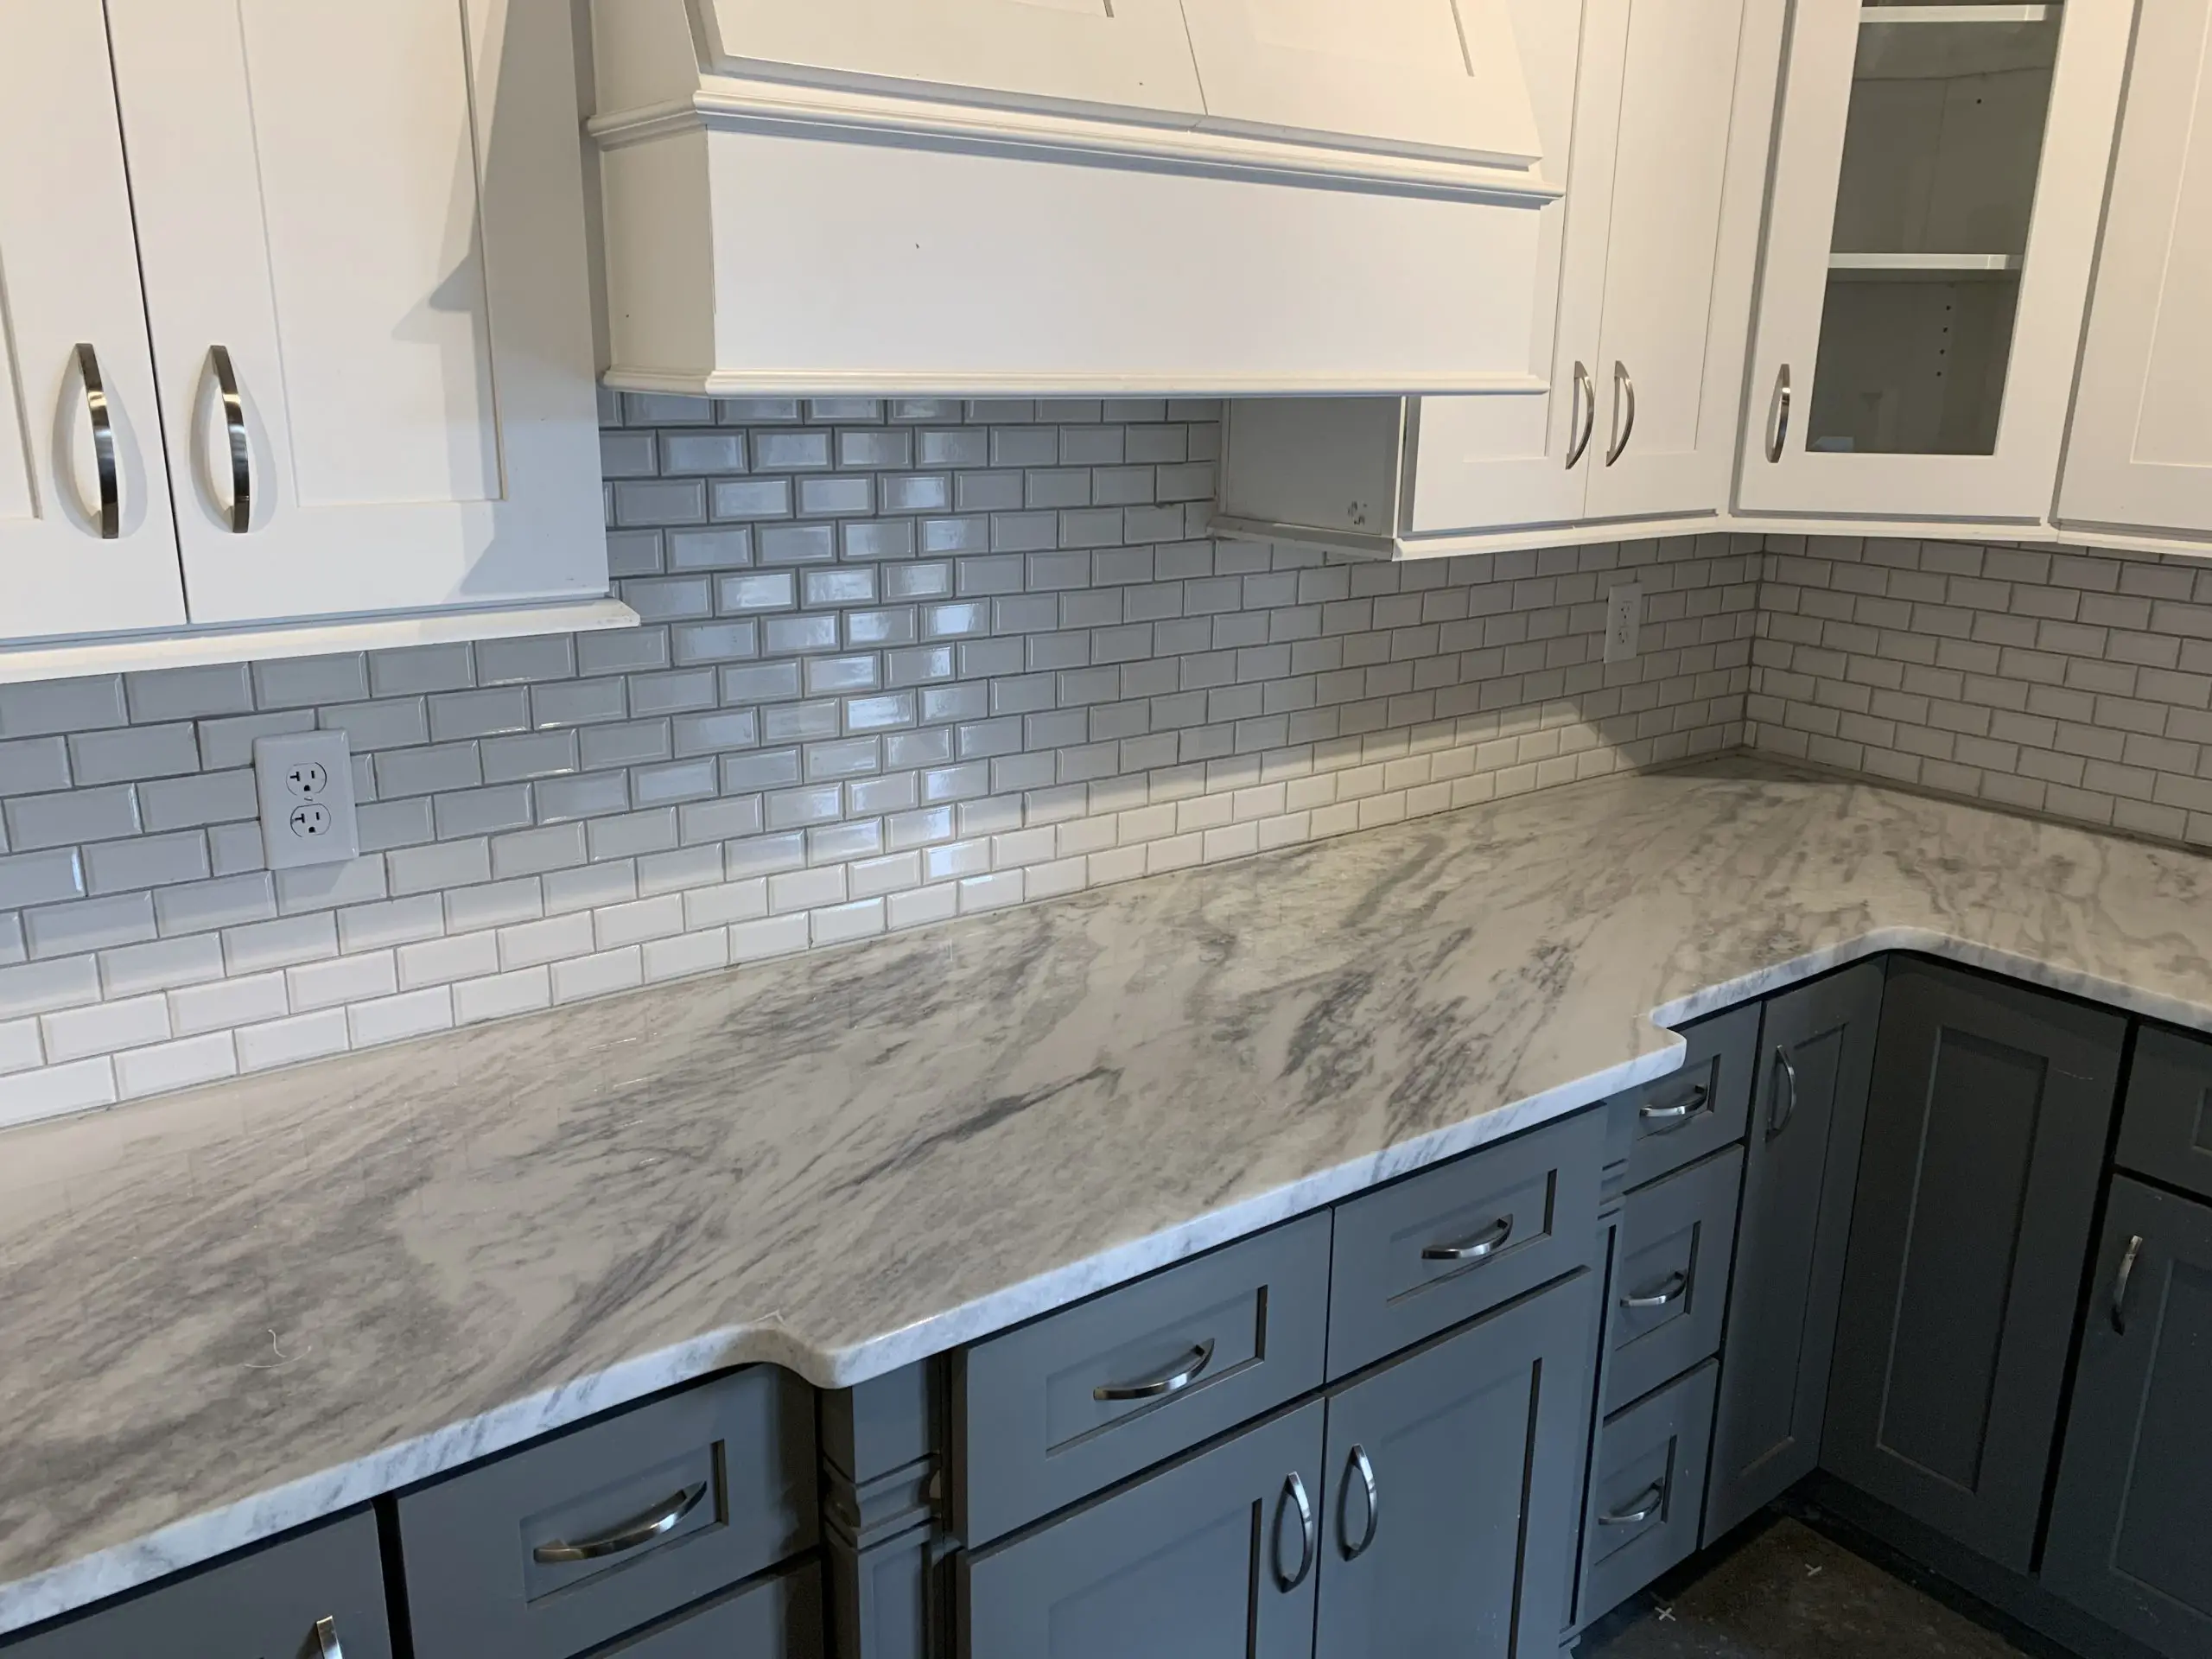 Types of Countertops - Mont Blanc Marble Countertop